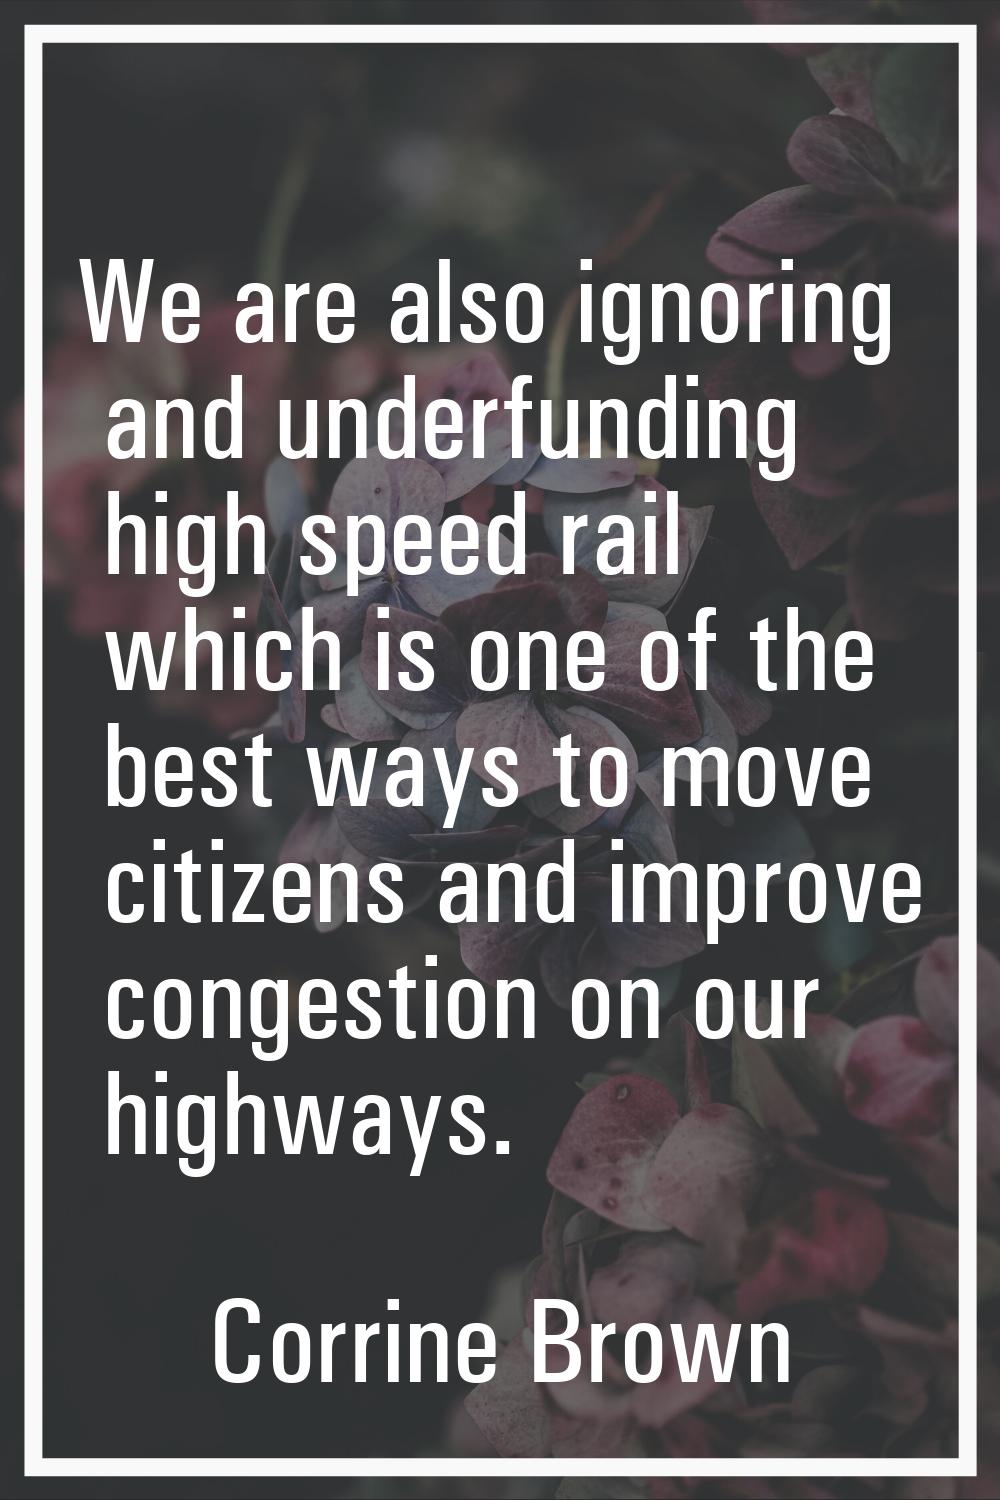 We are also ignoring and underfunding high speed rail which is one of the best ways to move citizen